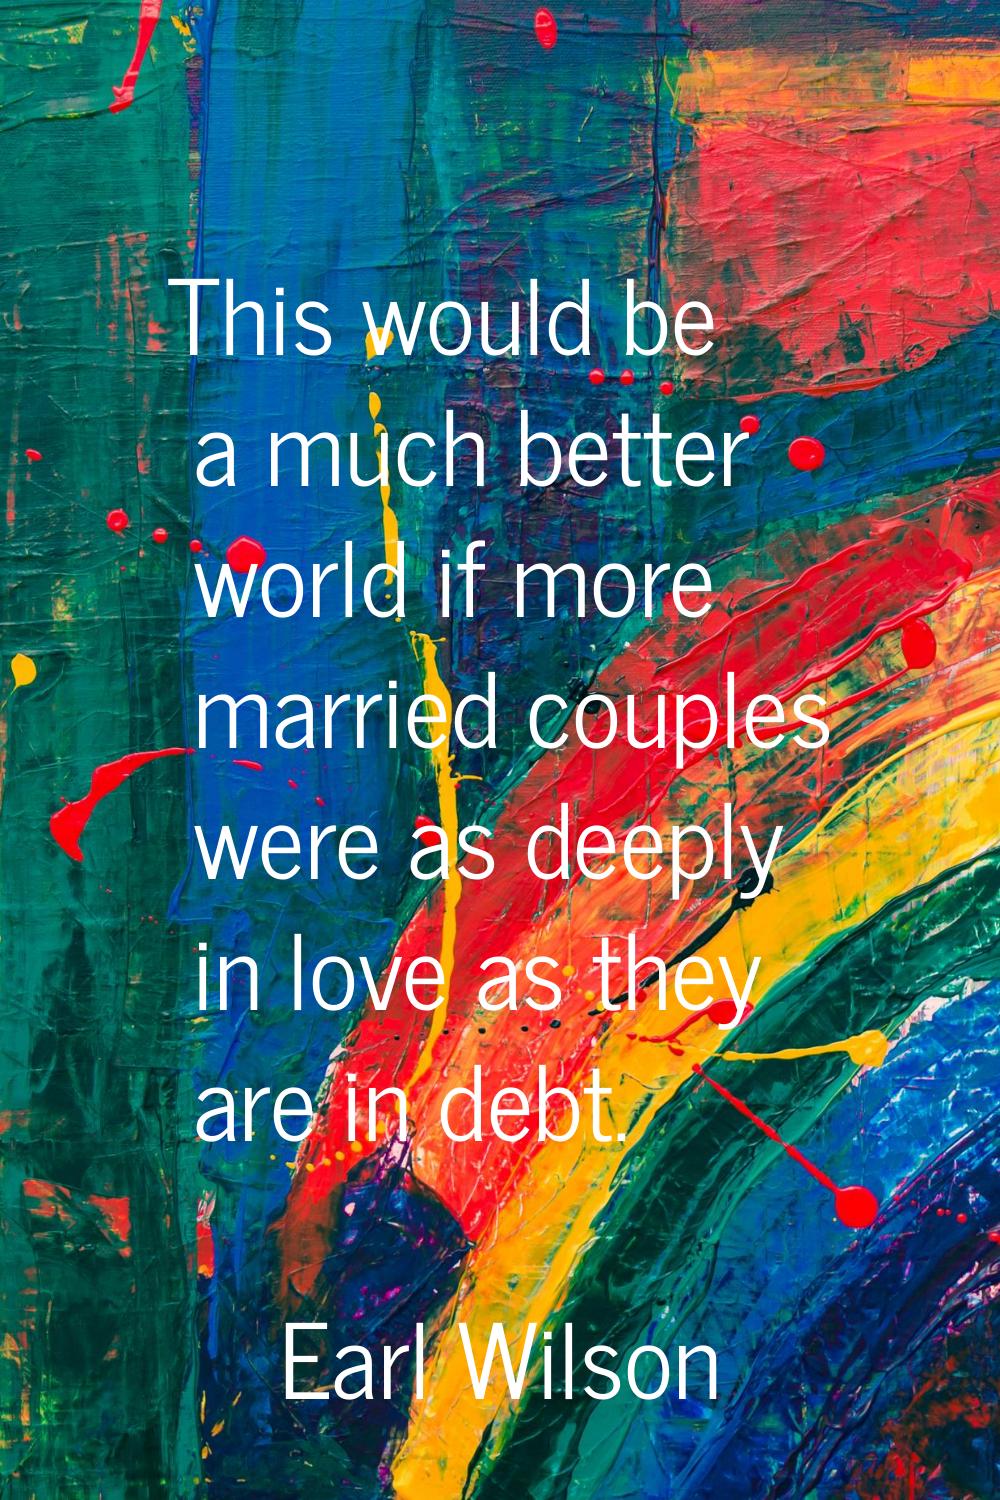 This would be a much better world if more married couples were as deeply in love as they are in deb